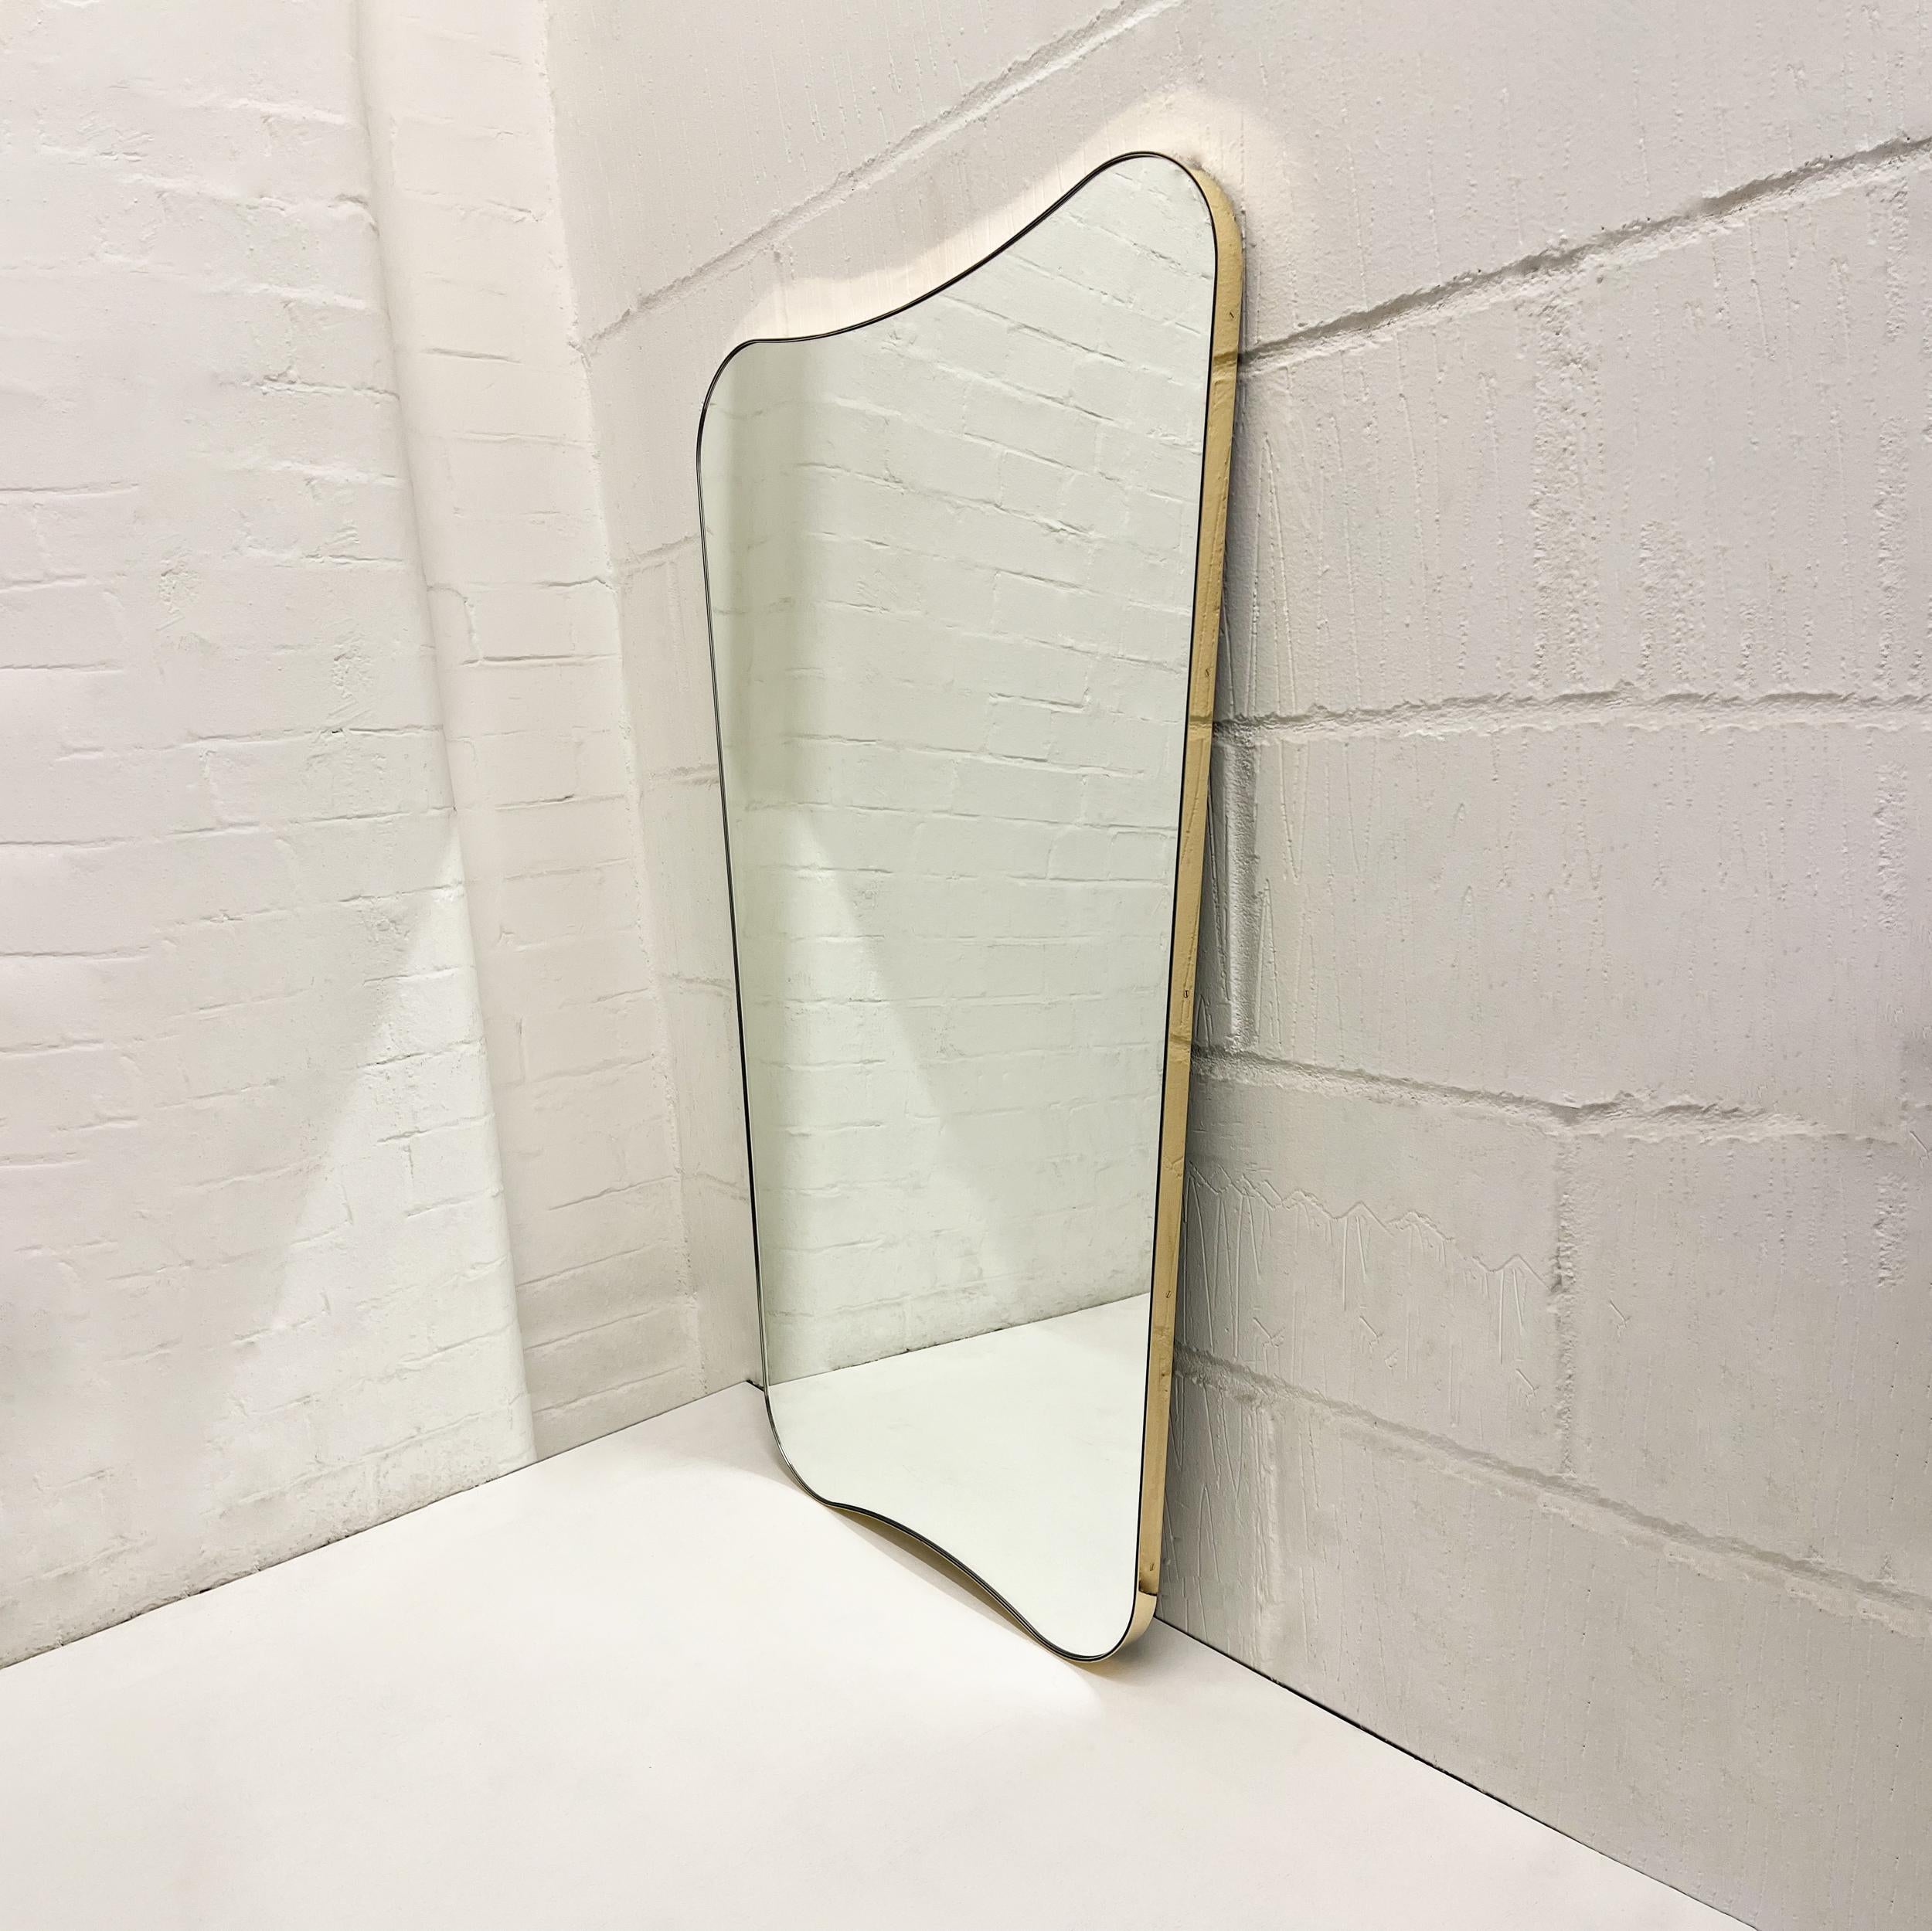 Elegant mirror with a minimalist brass frame inspired by the celebrated work of Italian designer Gio Ponti. Hand-crafted in London, UK, to very high quality standards using pure solid brass.

Mirror dimensions: H 107cm x W 62cm x D 2.4cm / H 42” x W